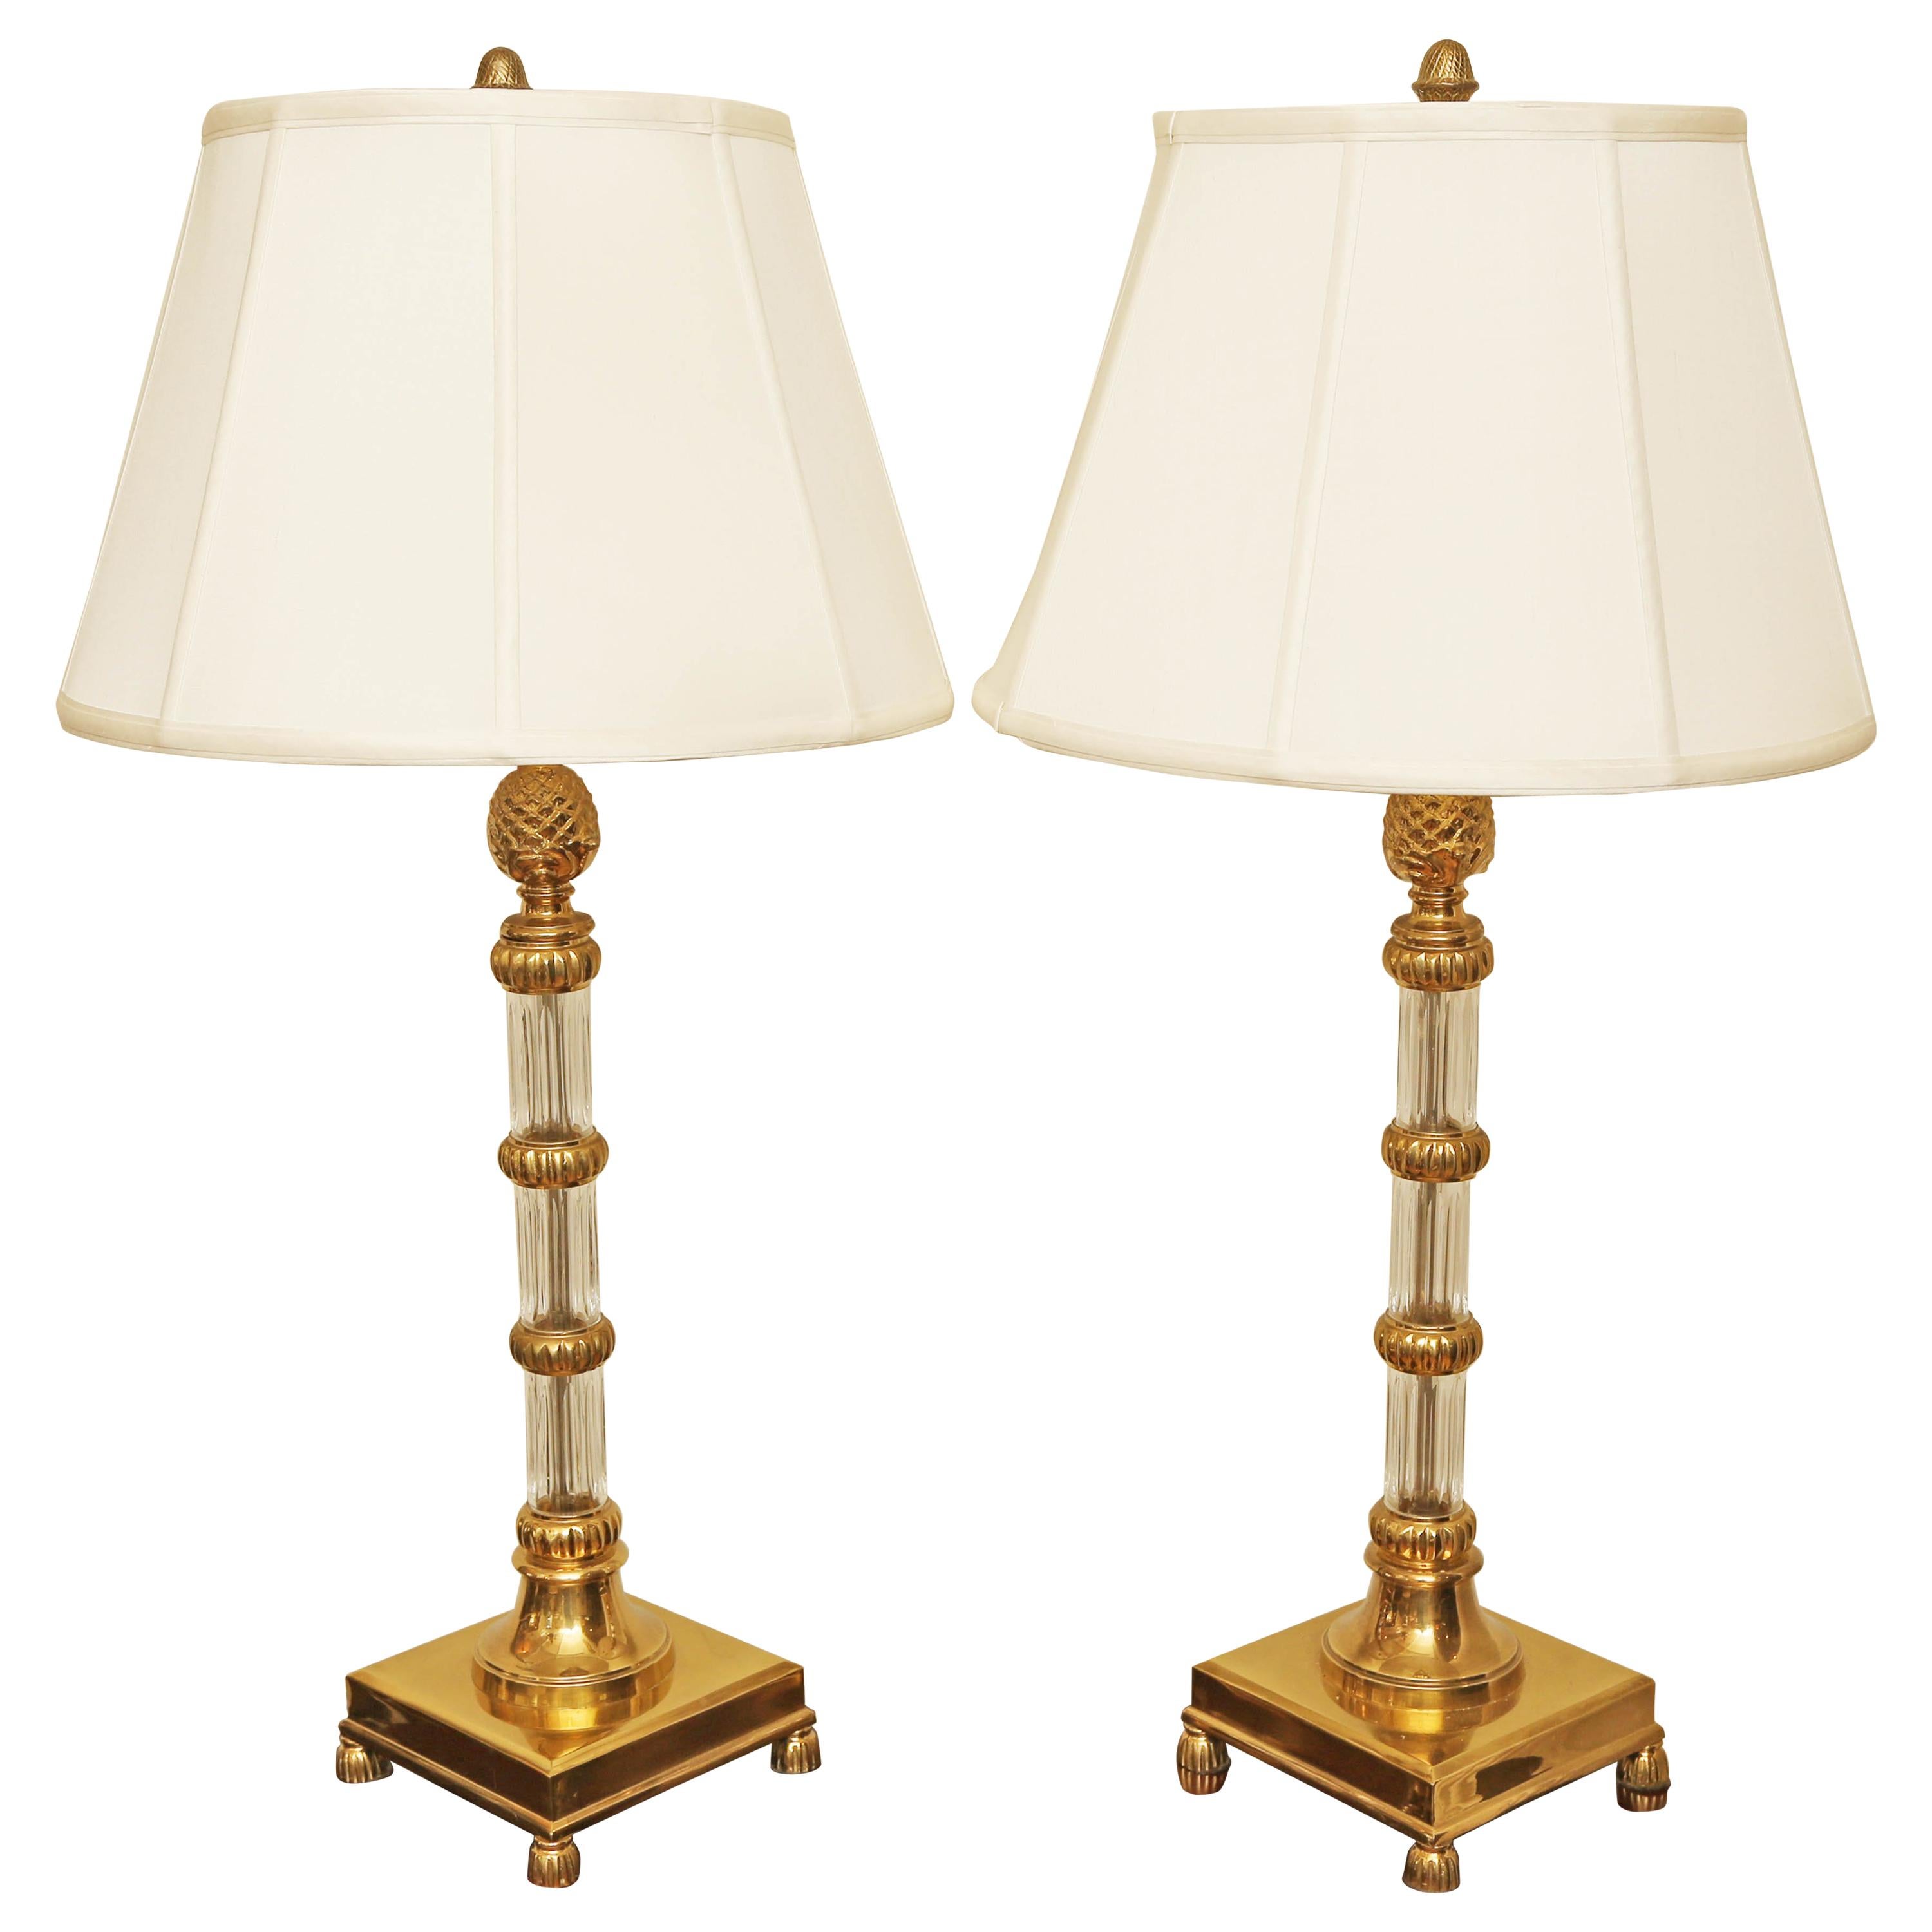 Pair of Brass and Crystal Candlestick Lamps